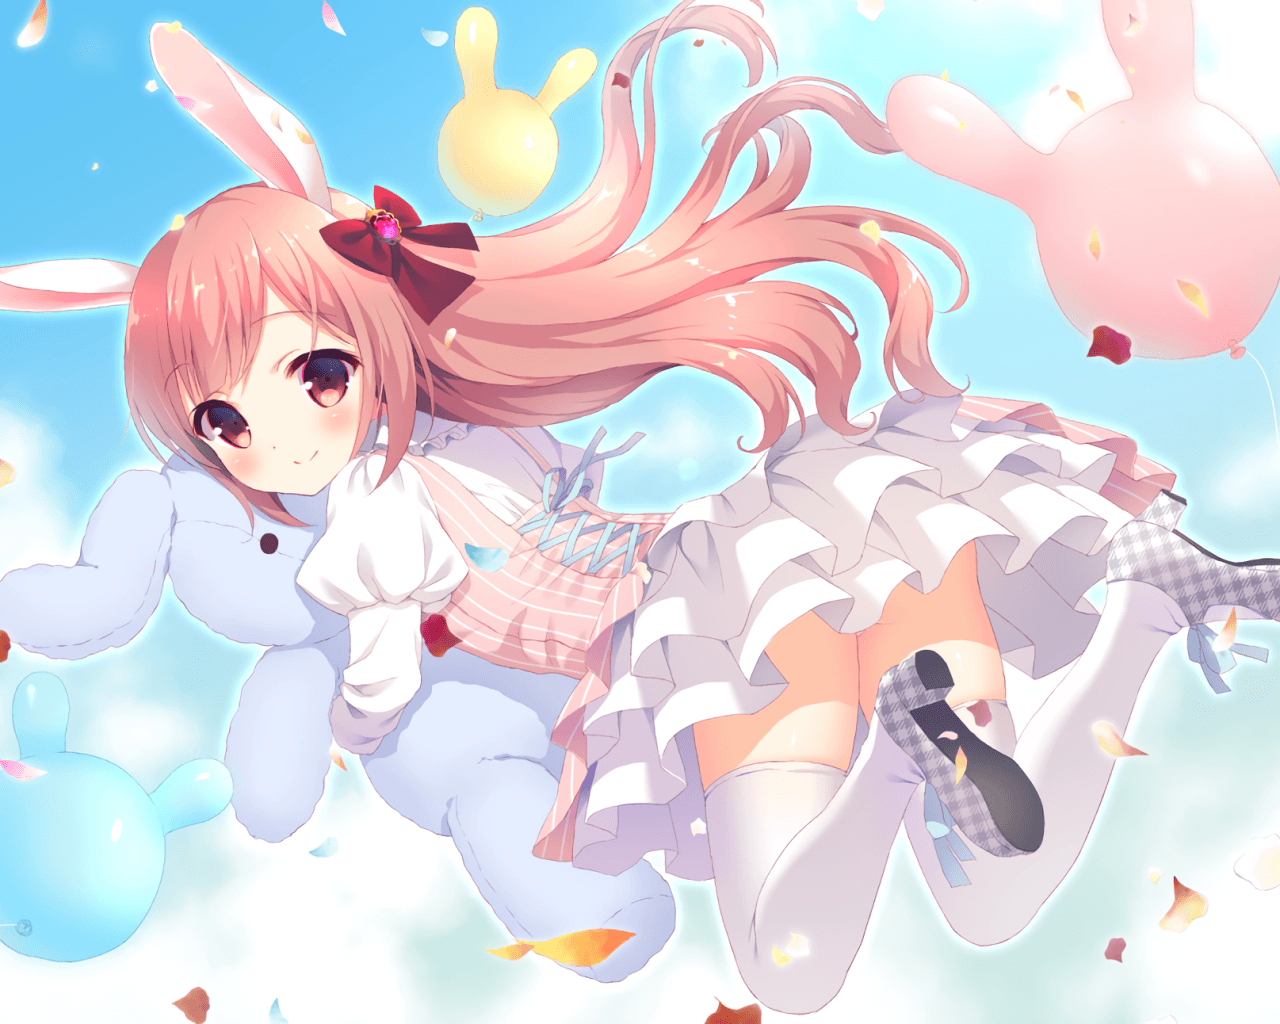 Rabbit Anime Wallpapers - Top Free Rabbit Anime Backgrounds